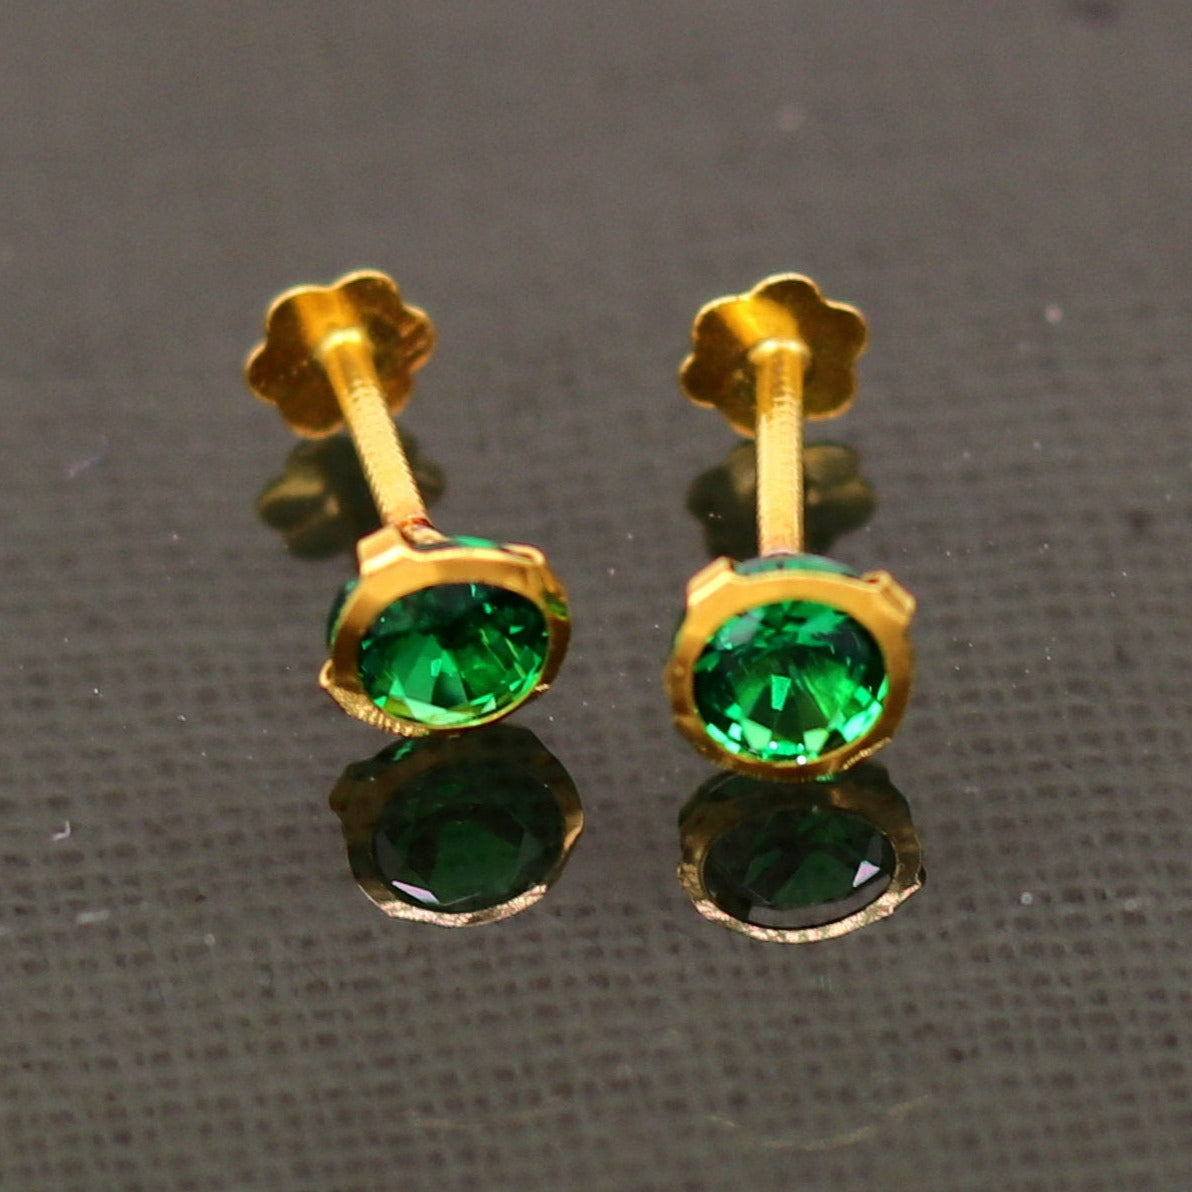 4mm 18k yellow gold handmade fabulous green cubic zircon stone excellent antique vintage design stud earrings pair unisex jewelry er115 - TRIBAL ORNAMENTS